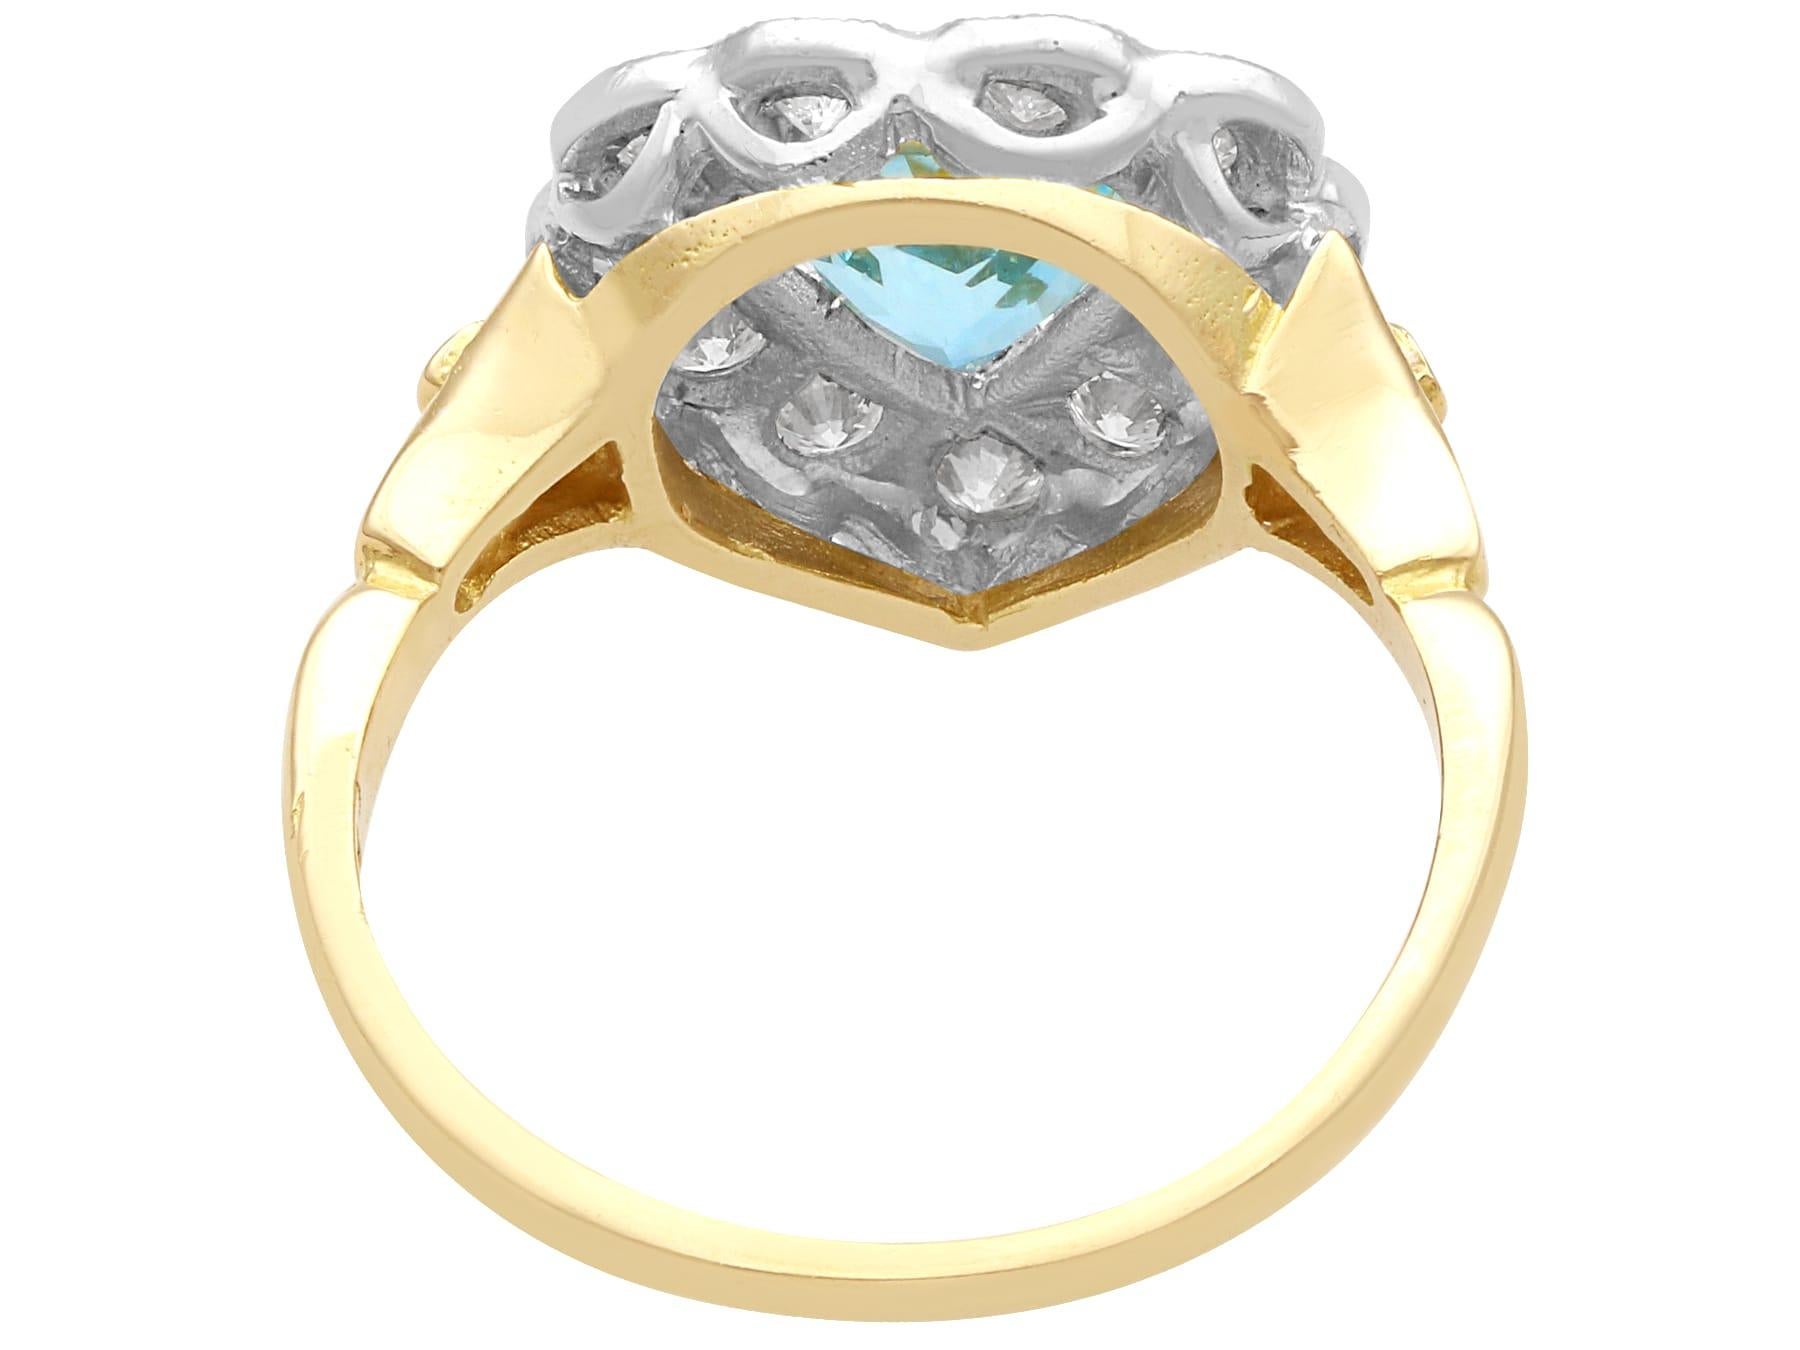 Vintage 1.50Ct Aquamarine 0.88Ct Diamond 18k Yellow Gold Dress Ring Circa 1980 In Excellent Condition For Sale In Jesmond, Newcastle Upon Tyne